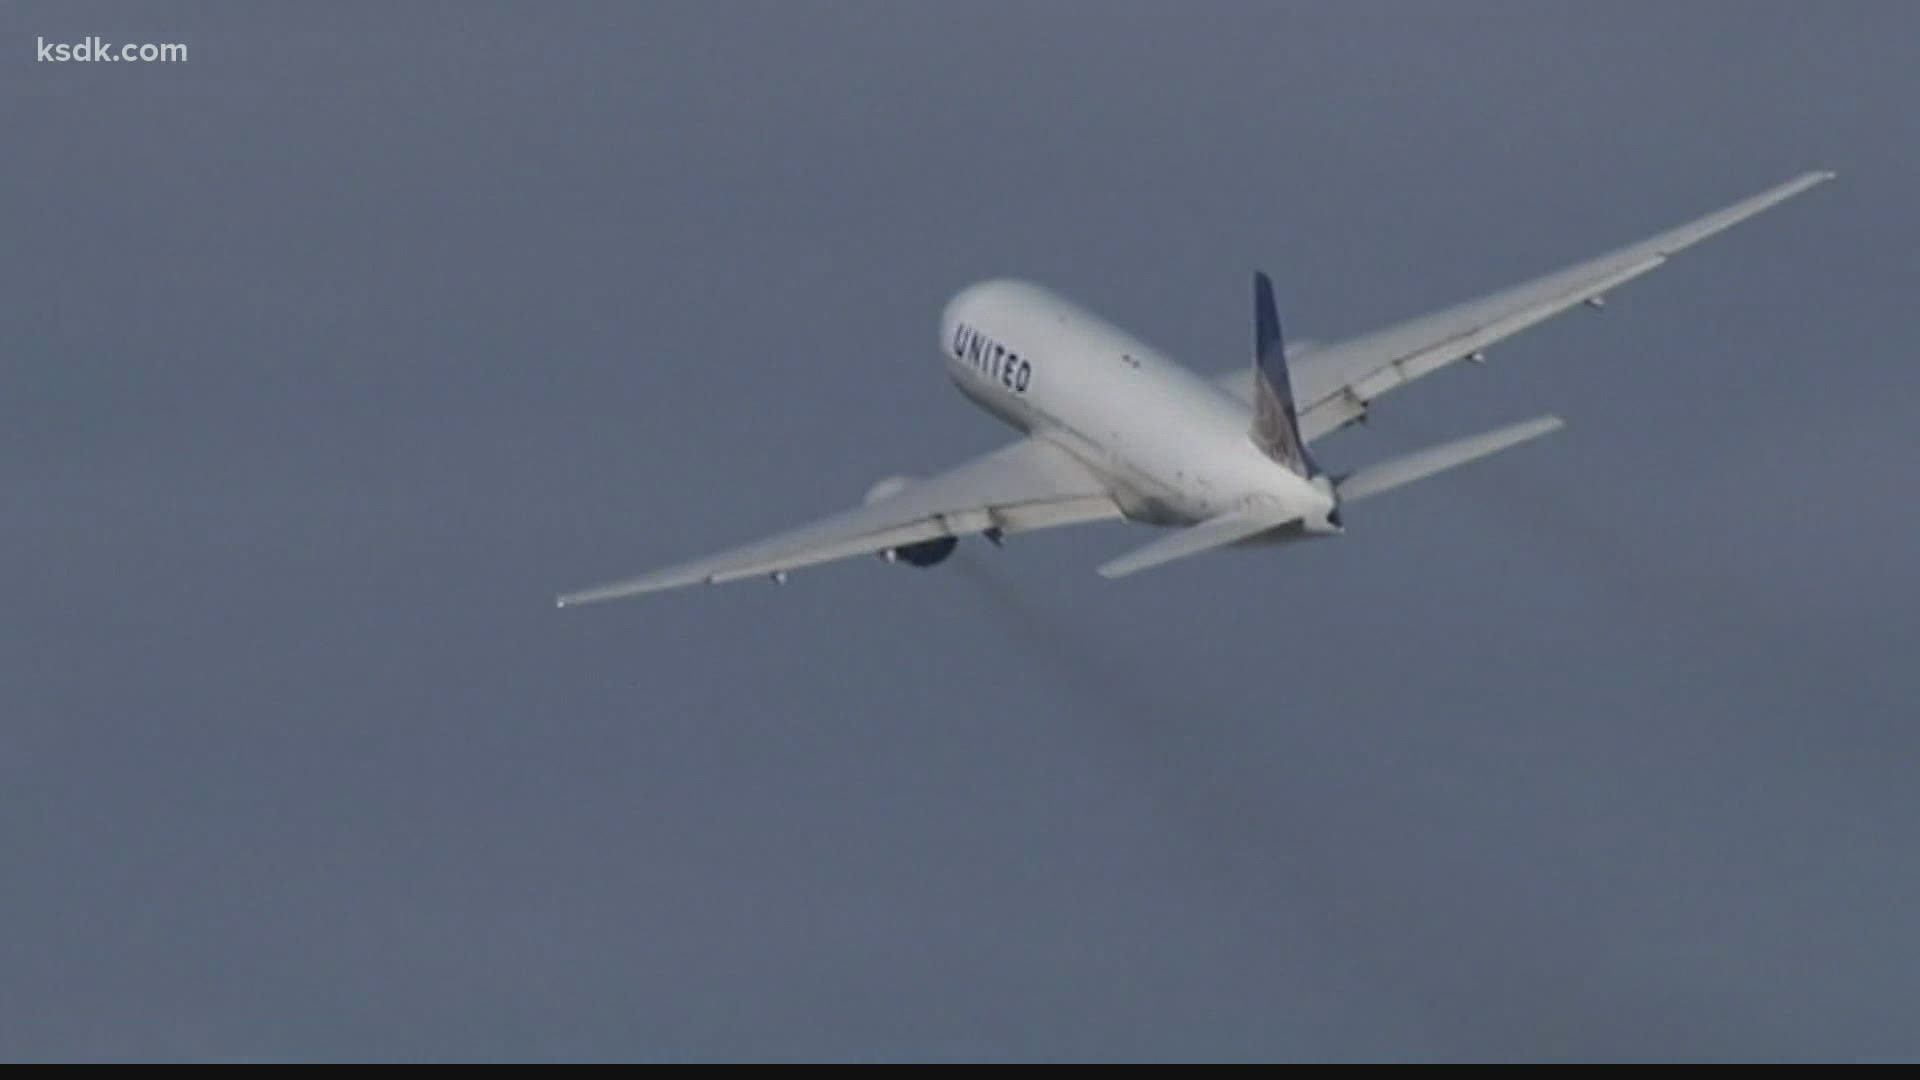 United said it would fly from Lambert to Myrtle Beach and Hilton Head, South Carolina, beginning May 27 through Sept. 6.